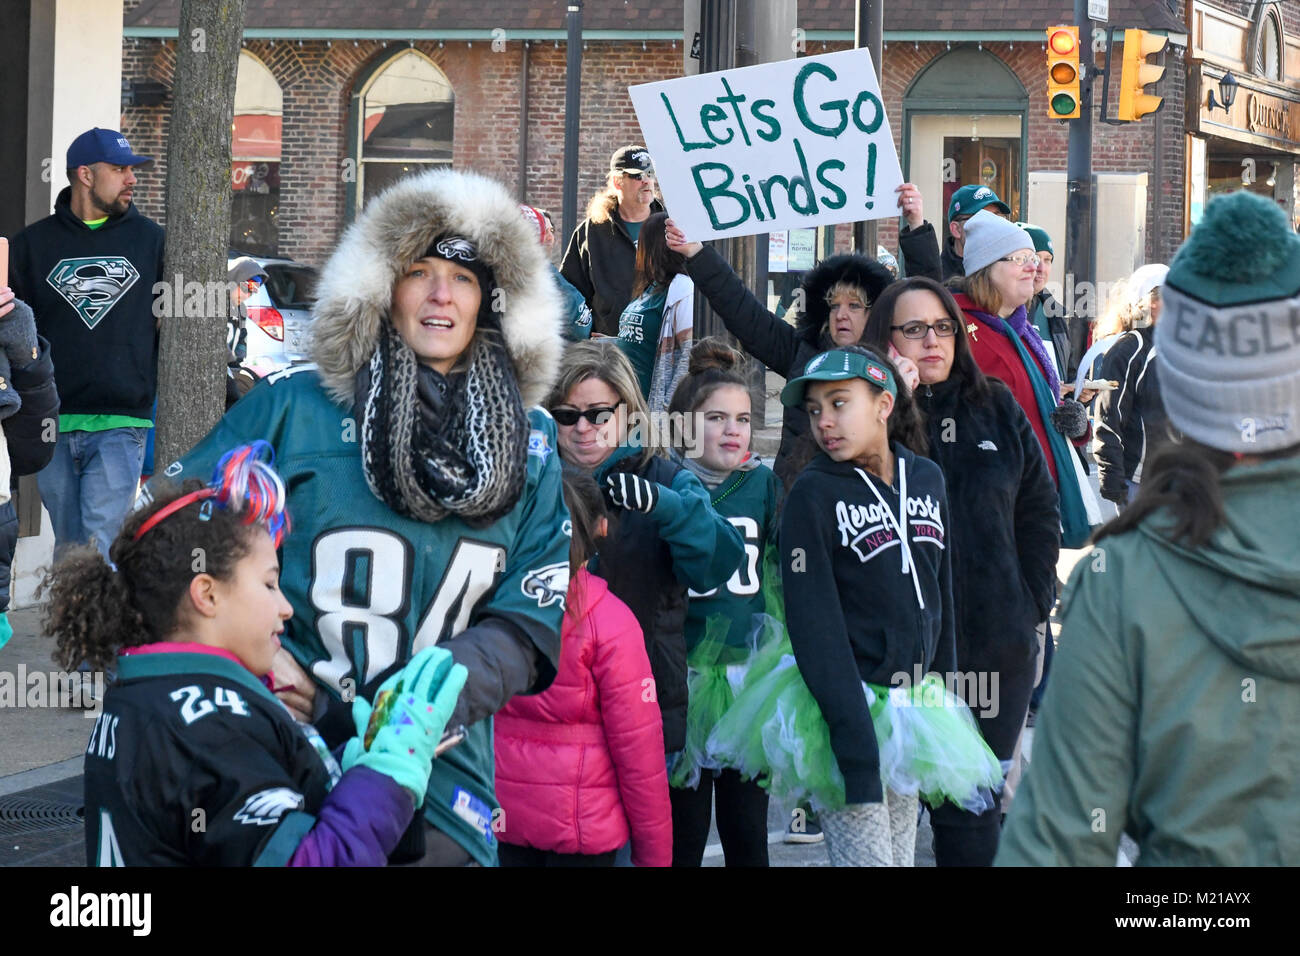 Media, PA, USA, Thousands of Philadelphia Eagles fans line the streets of Media for a rally supporting the NFC Championship Philadelphia Eagles in their pursuit of winning the NFL Super Bowl. Media, Delaware County, PA is located approximately 14 miles South of Philadelphia, PA. Temperatures in the mid 20 degree range (fahrenheit) Credit: Don Mennig/Alamy Live News Stock Photo